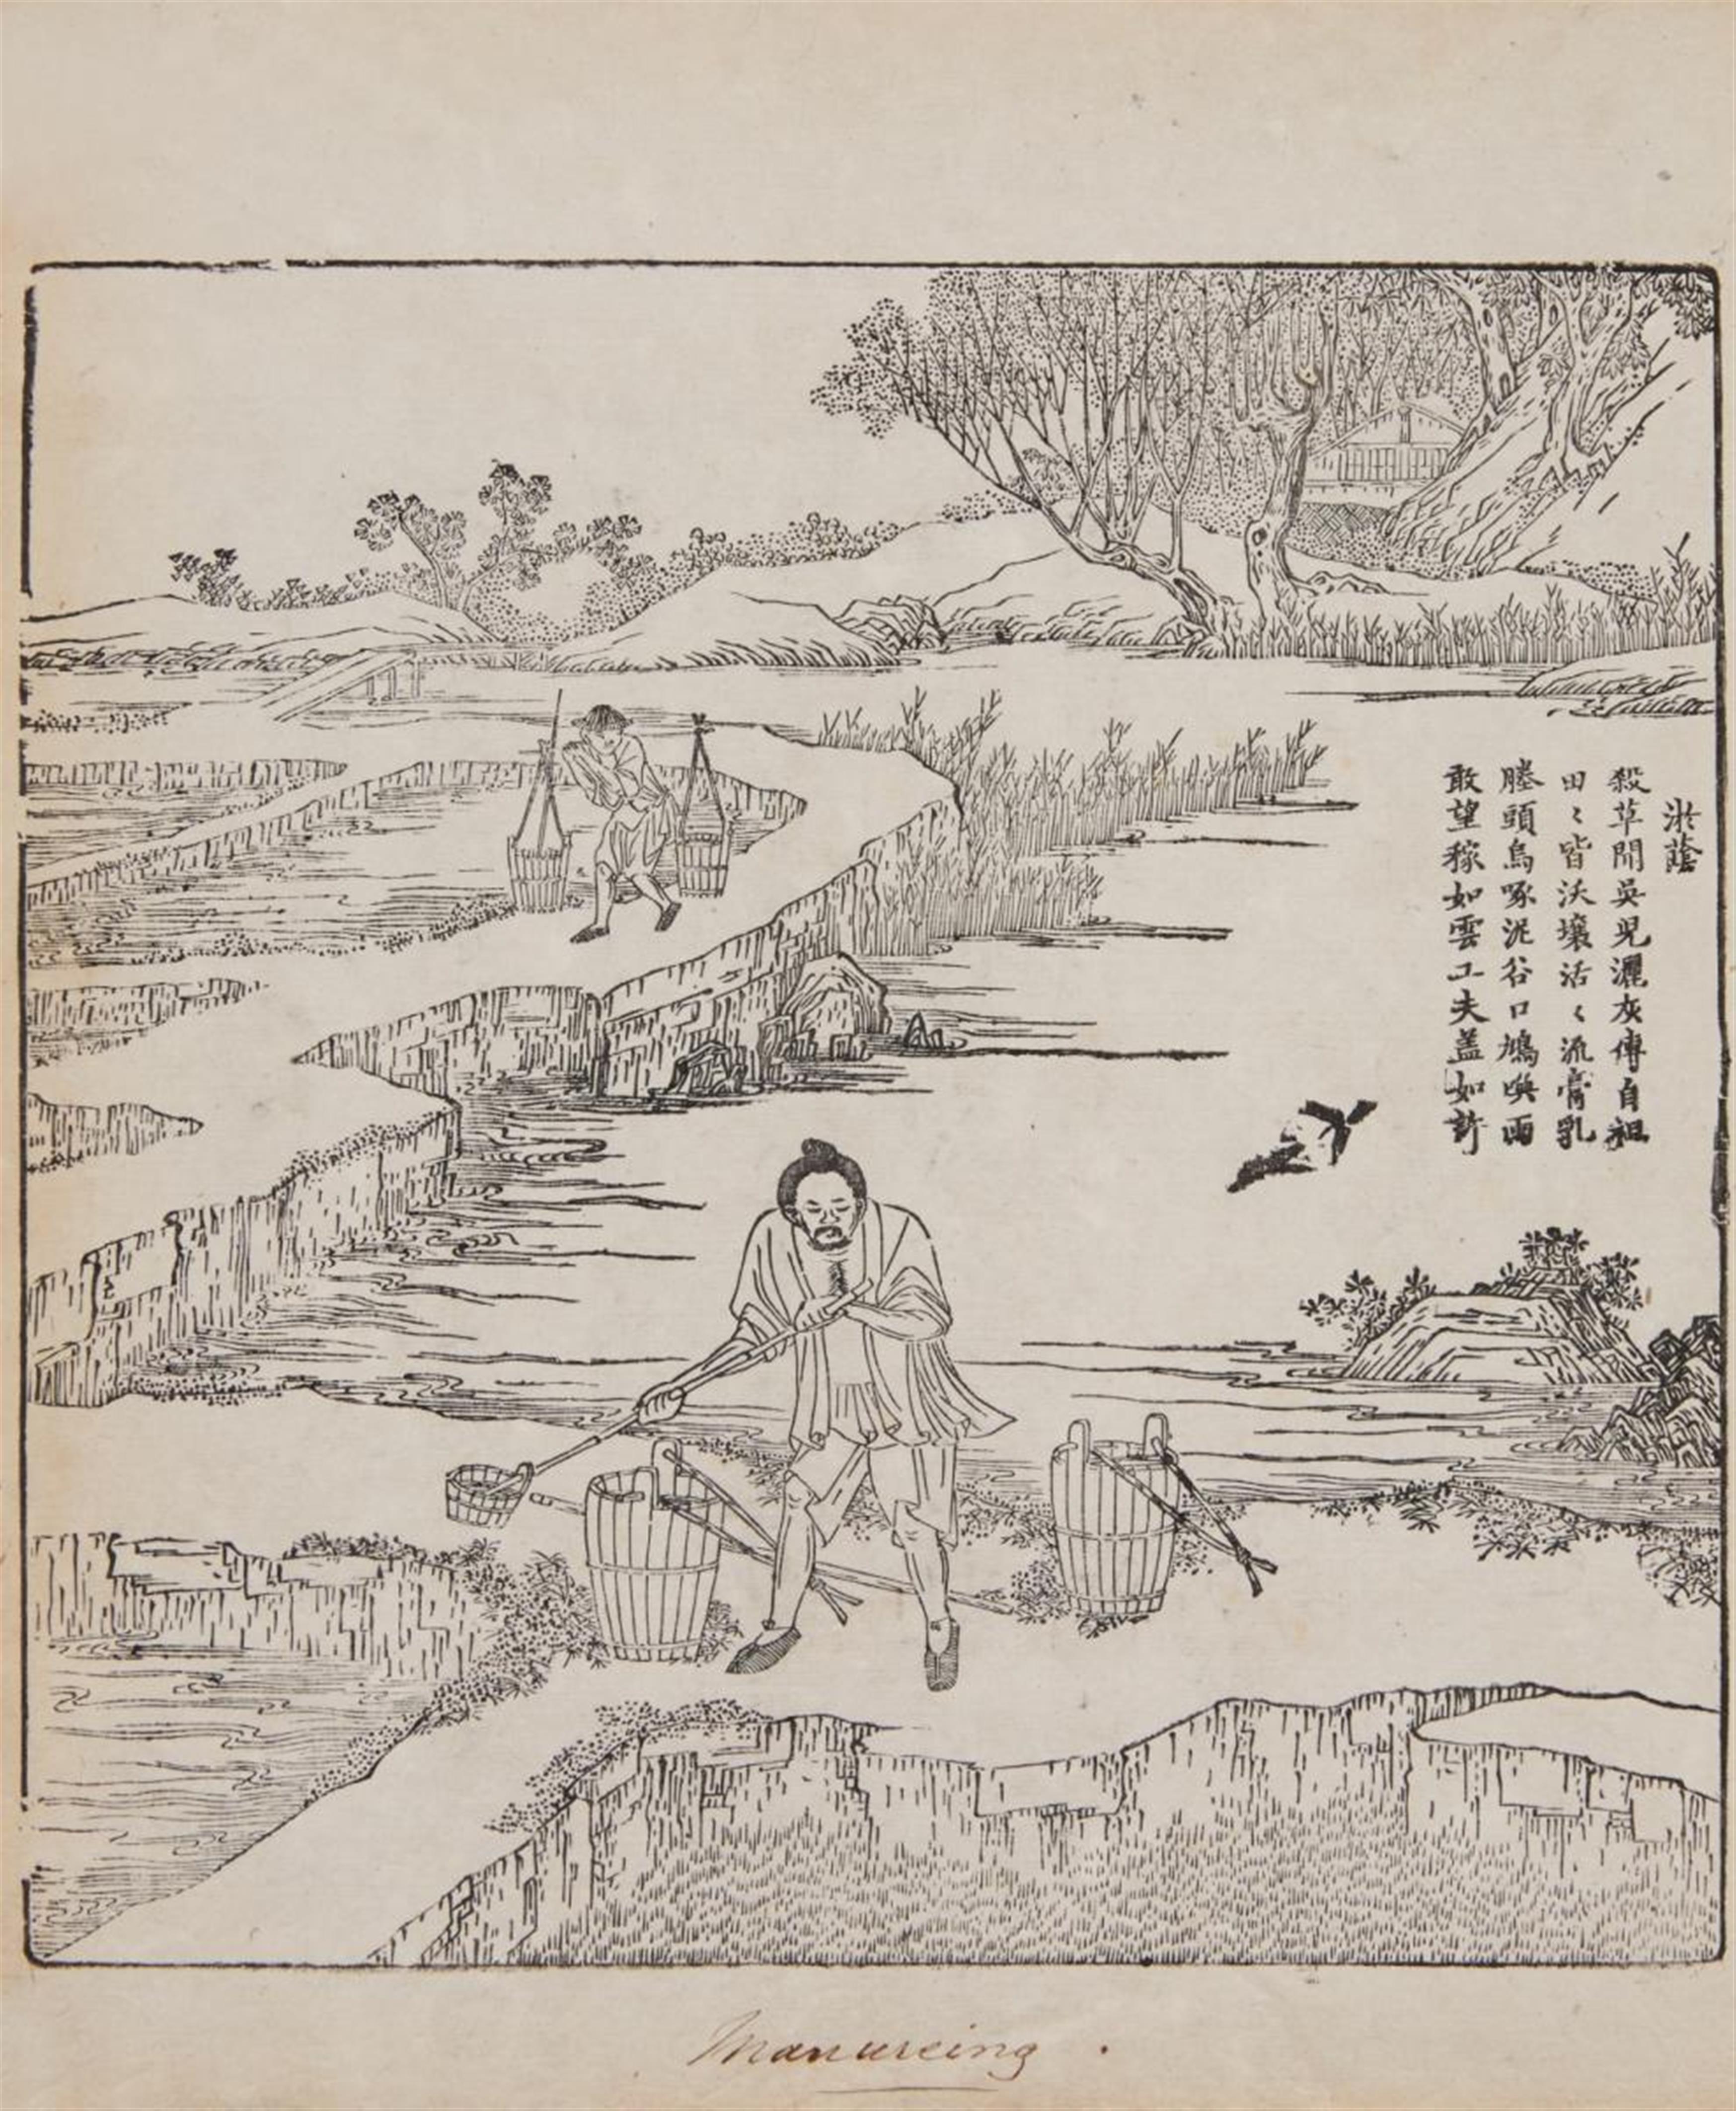 Jiao Bingzhen . Qing dynasty - The first volume of Gengzhi tu (Pictures of Tilling and Weaving) with illustrations of rice-planting activities yet without the imperial poems. European binding. Qing dynasty. - image-2